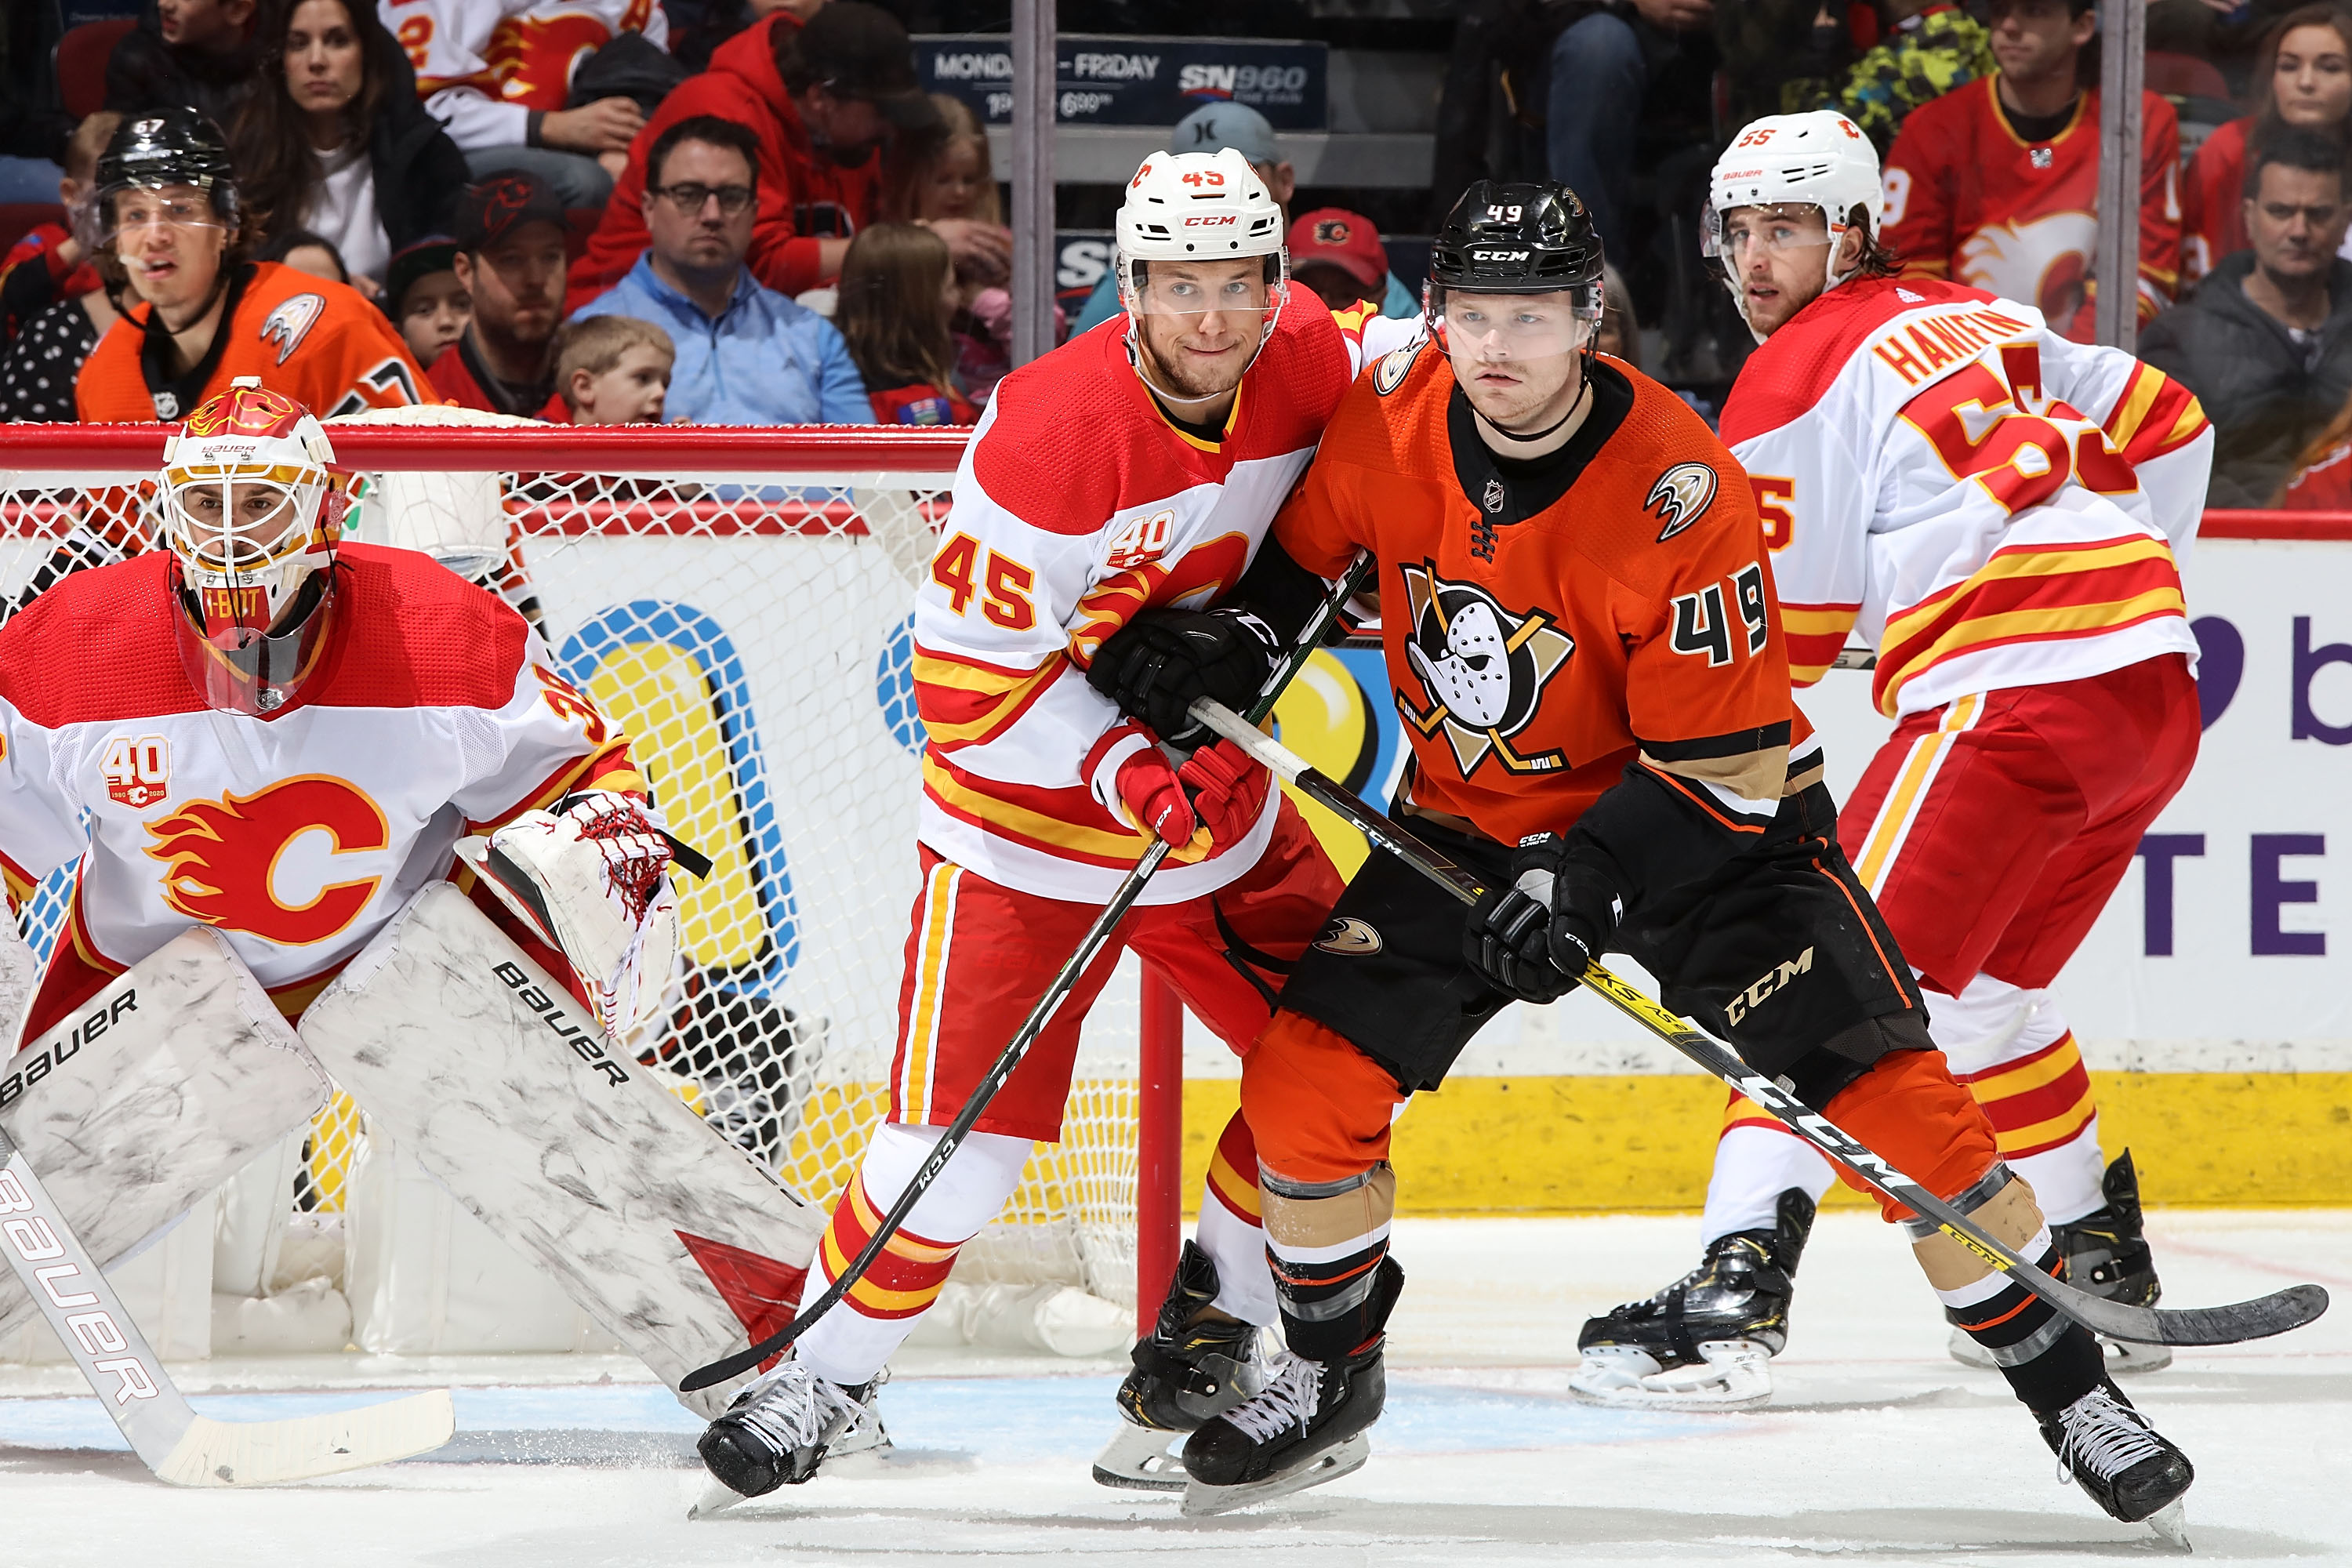 Alexander Yelesin #45 of the Calgary Flames and Max Jones #49 of the Anaheim Ducks compete for position during an NHL game on February 17, 2020 at the Scotiabank Saddledome in Calgary, Alberta, Canada.